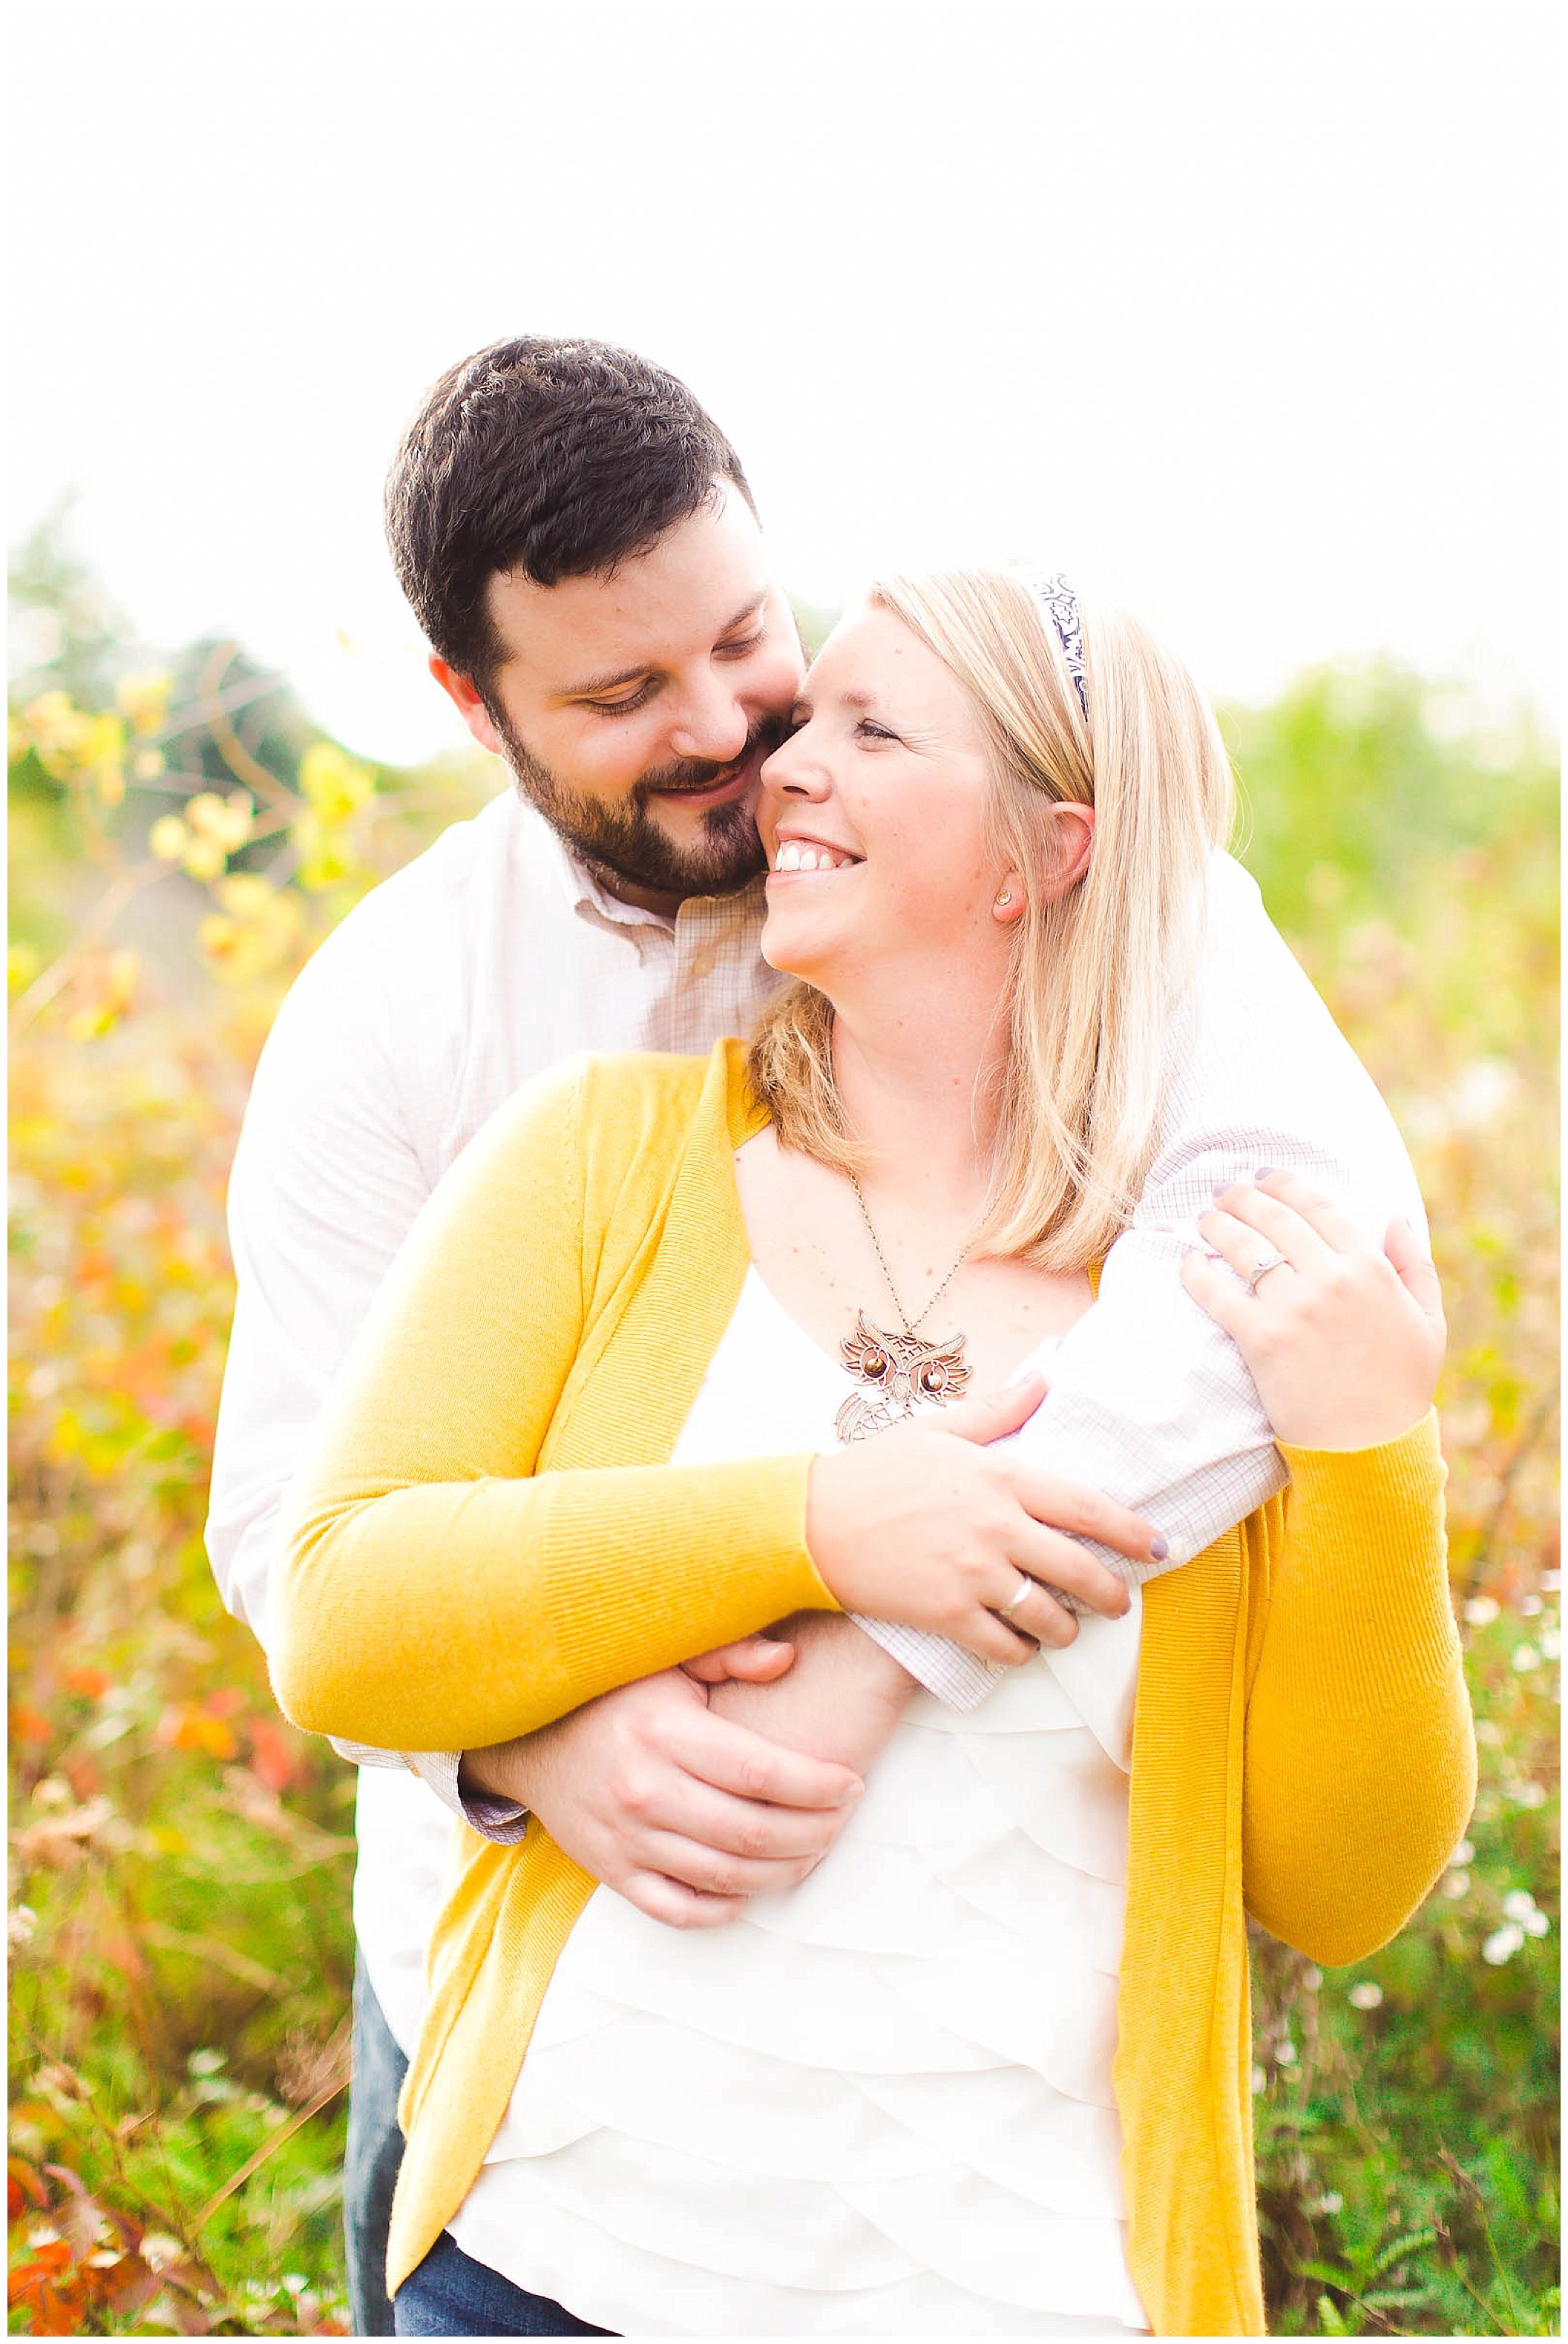 Sunshine filled engagement session in a field of wildflowers, Fort Wayne Indiana Wedding Photographer_0023.jpg